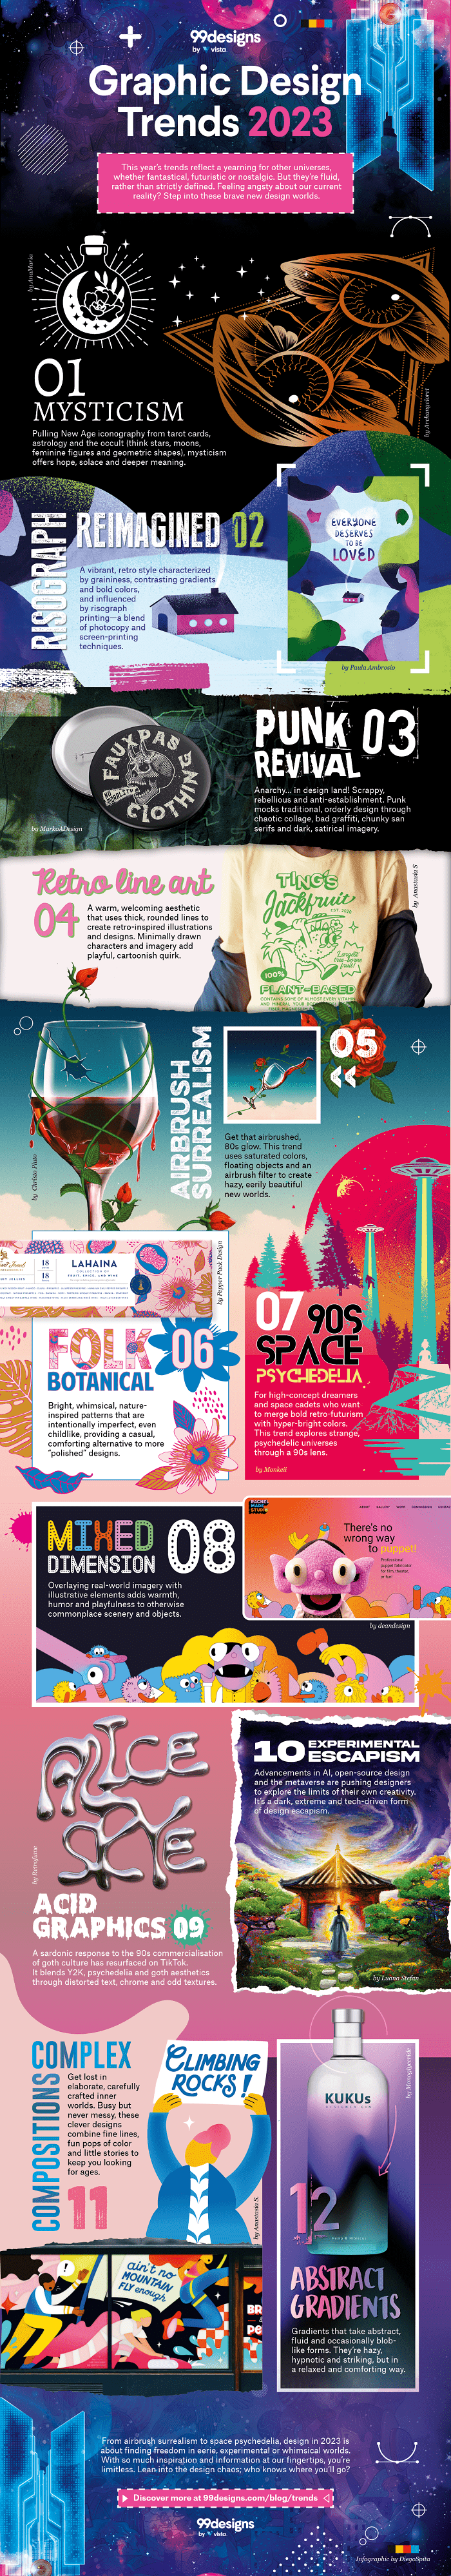 12 Graphic Design Trends for 2023 - Infographic